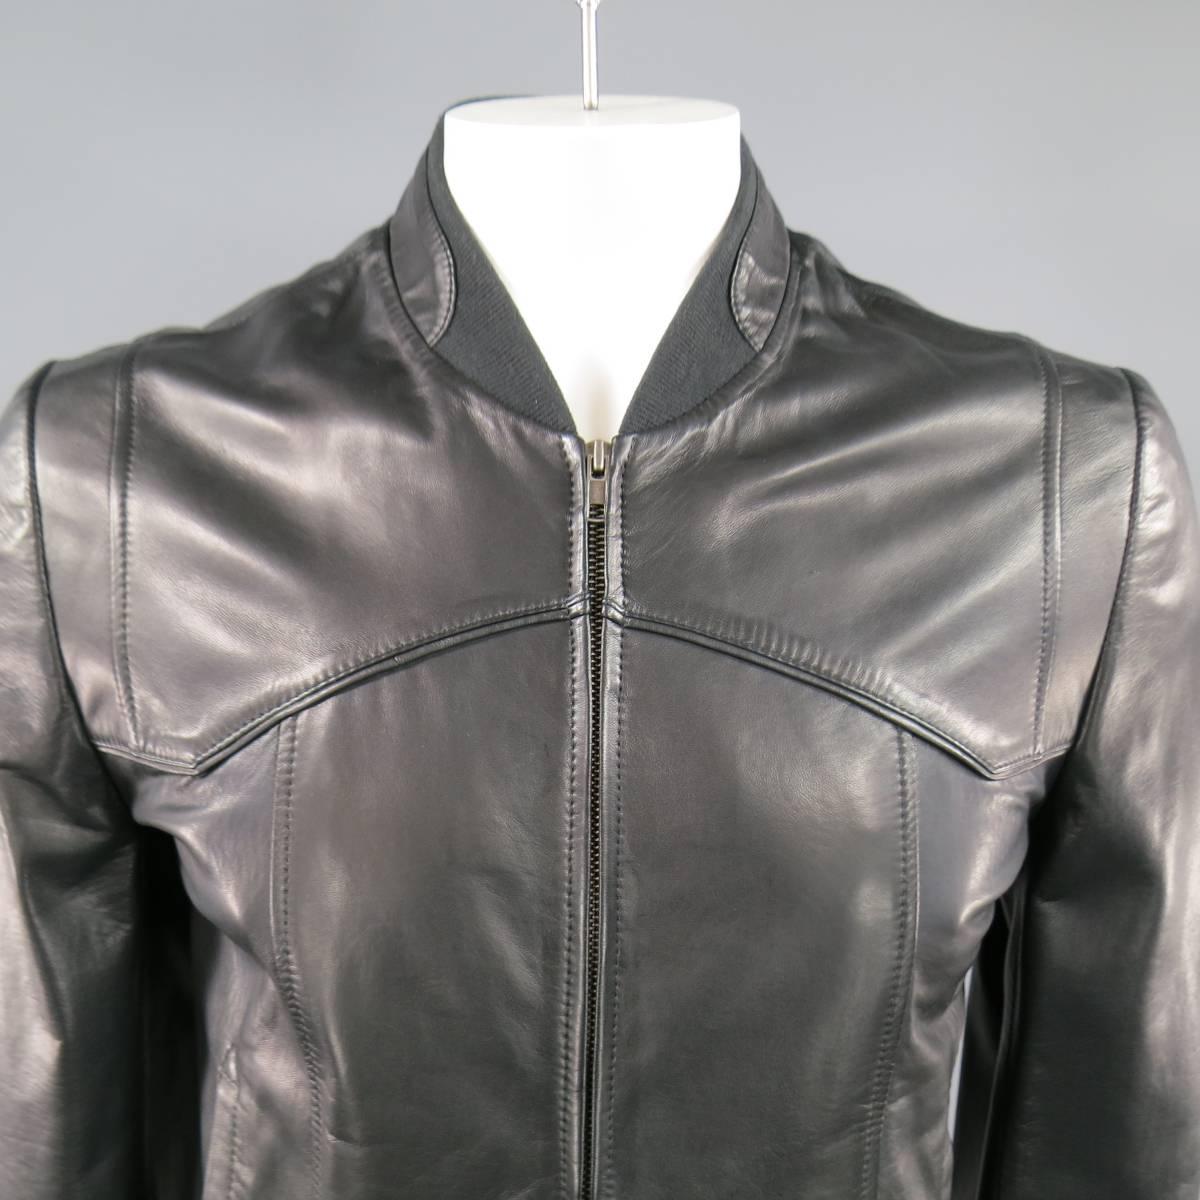 MAISON MARTIN MARGIELA Jacket consists of leather material in a black color tone. Designed with a zipper front, rib collar, tone-on-tone stitching throughout body and single snap cuffs. Detailed with side inseam pockets. Made in Italy.
 
Very Good